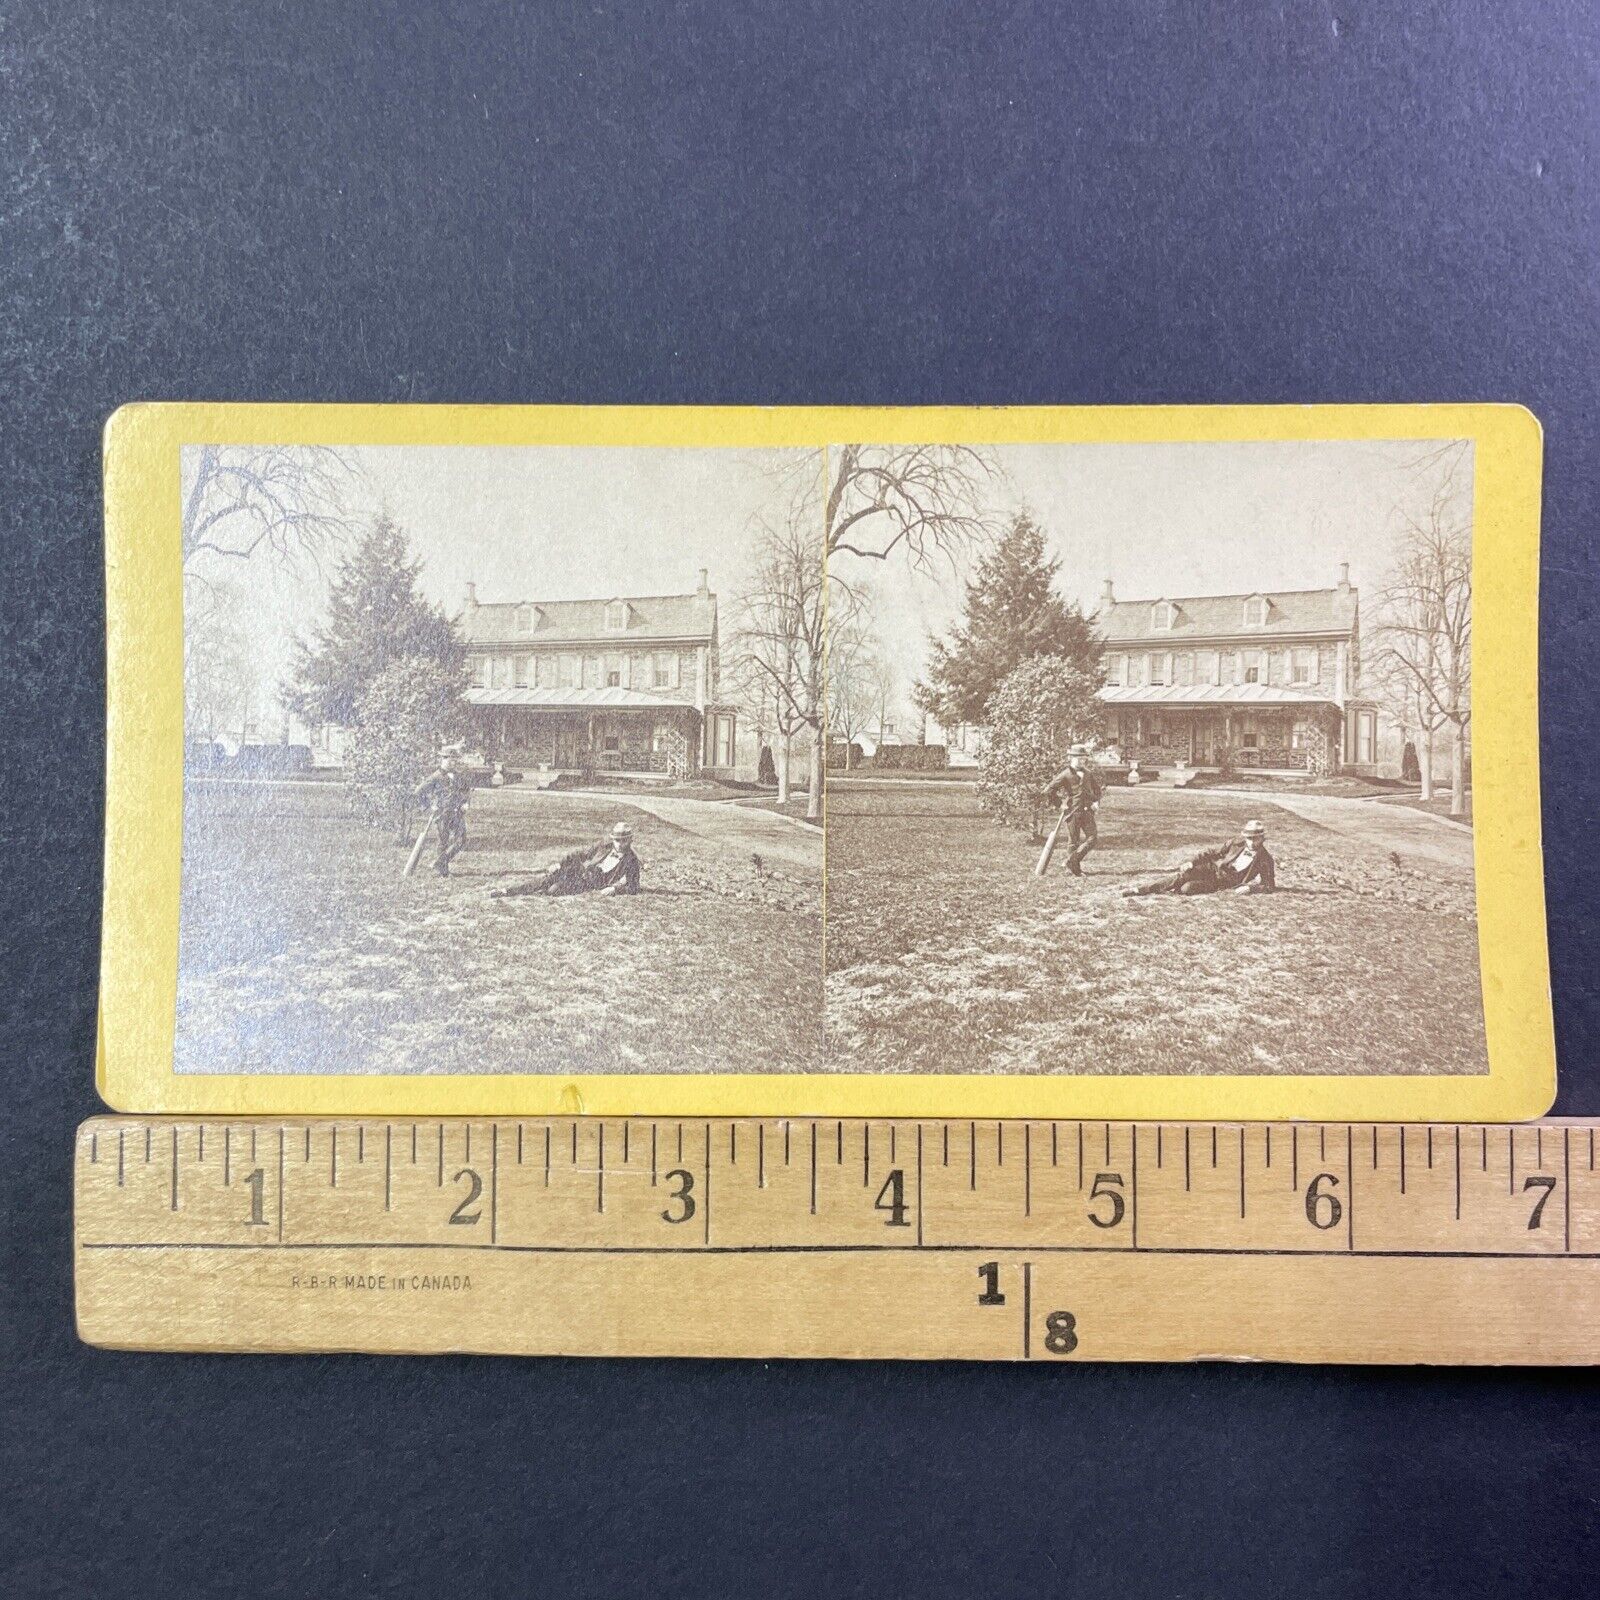 Cricket Players New Hope Pennsylvania Stereoview Photo Sports Card Antique c1867